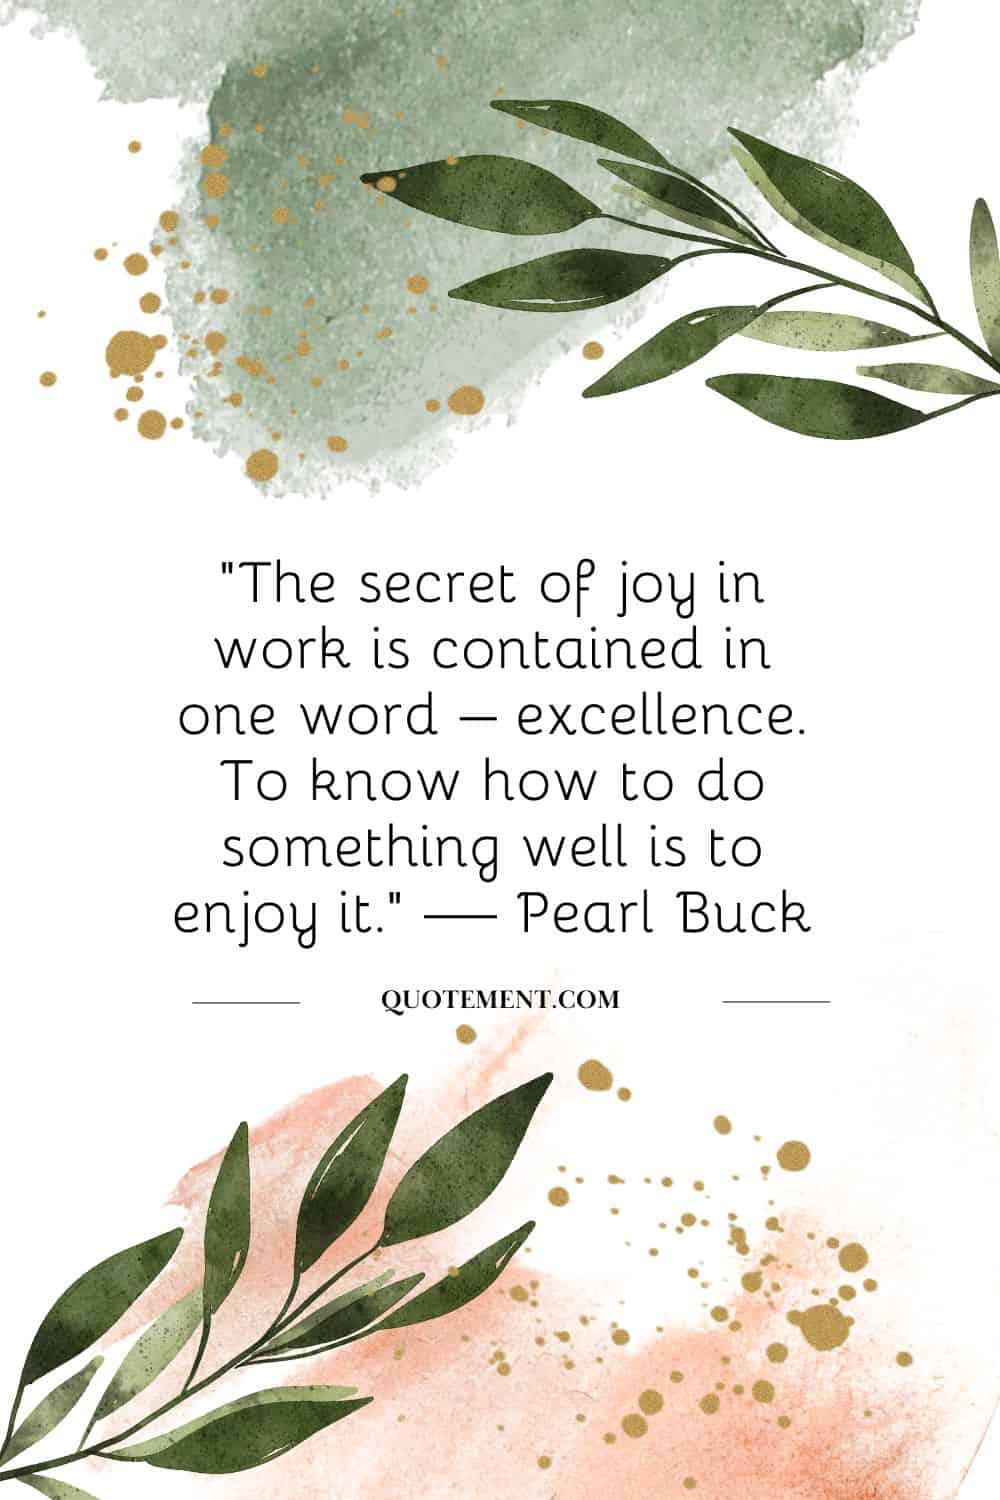 “The secret of joy in work is contained in one word – excellence. To know how to do something well is to enjoy it.” — Pearl Buck